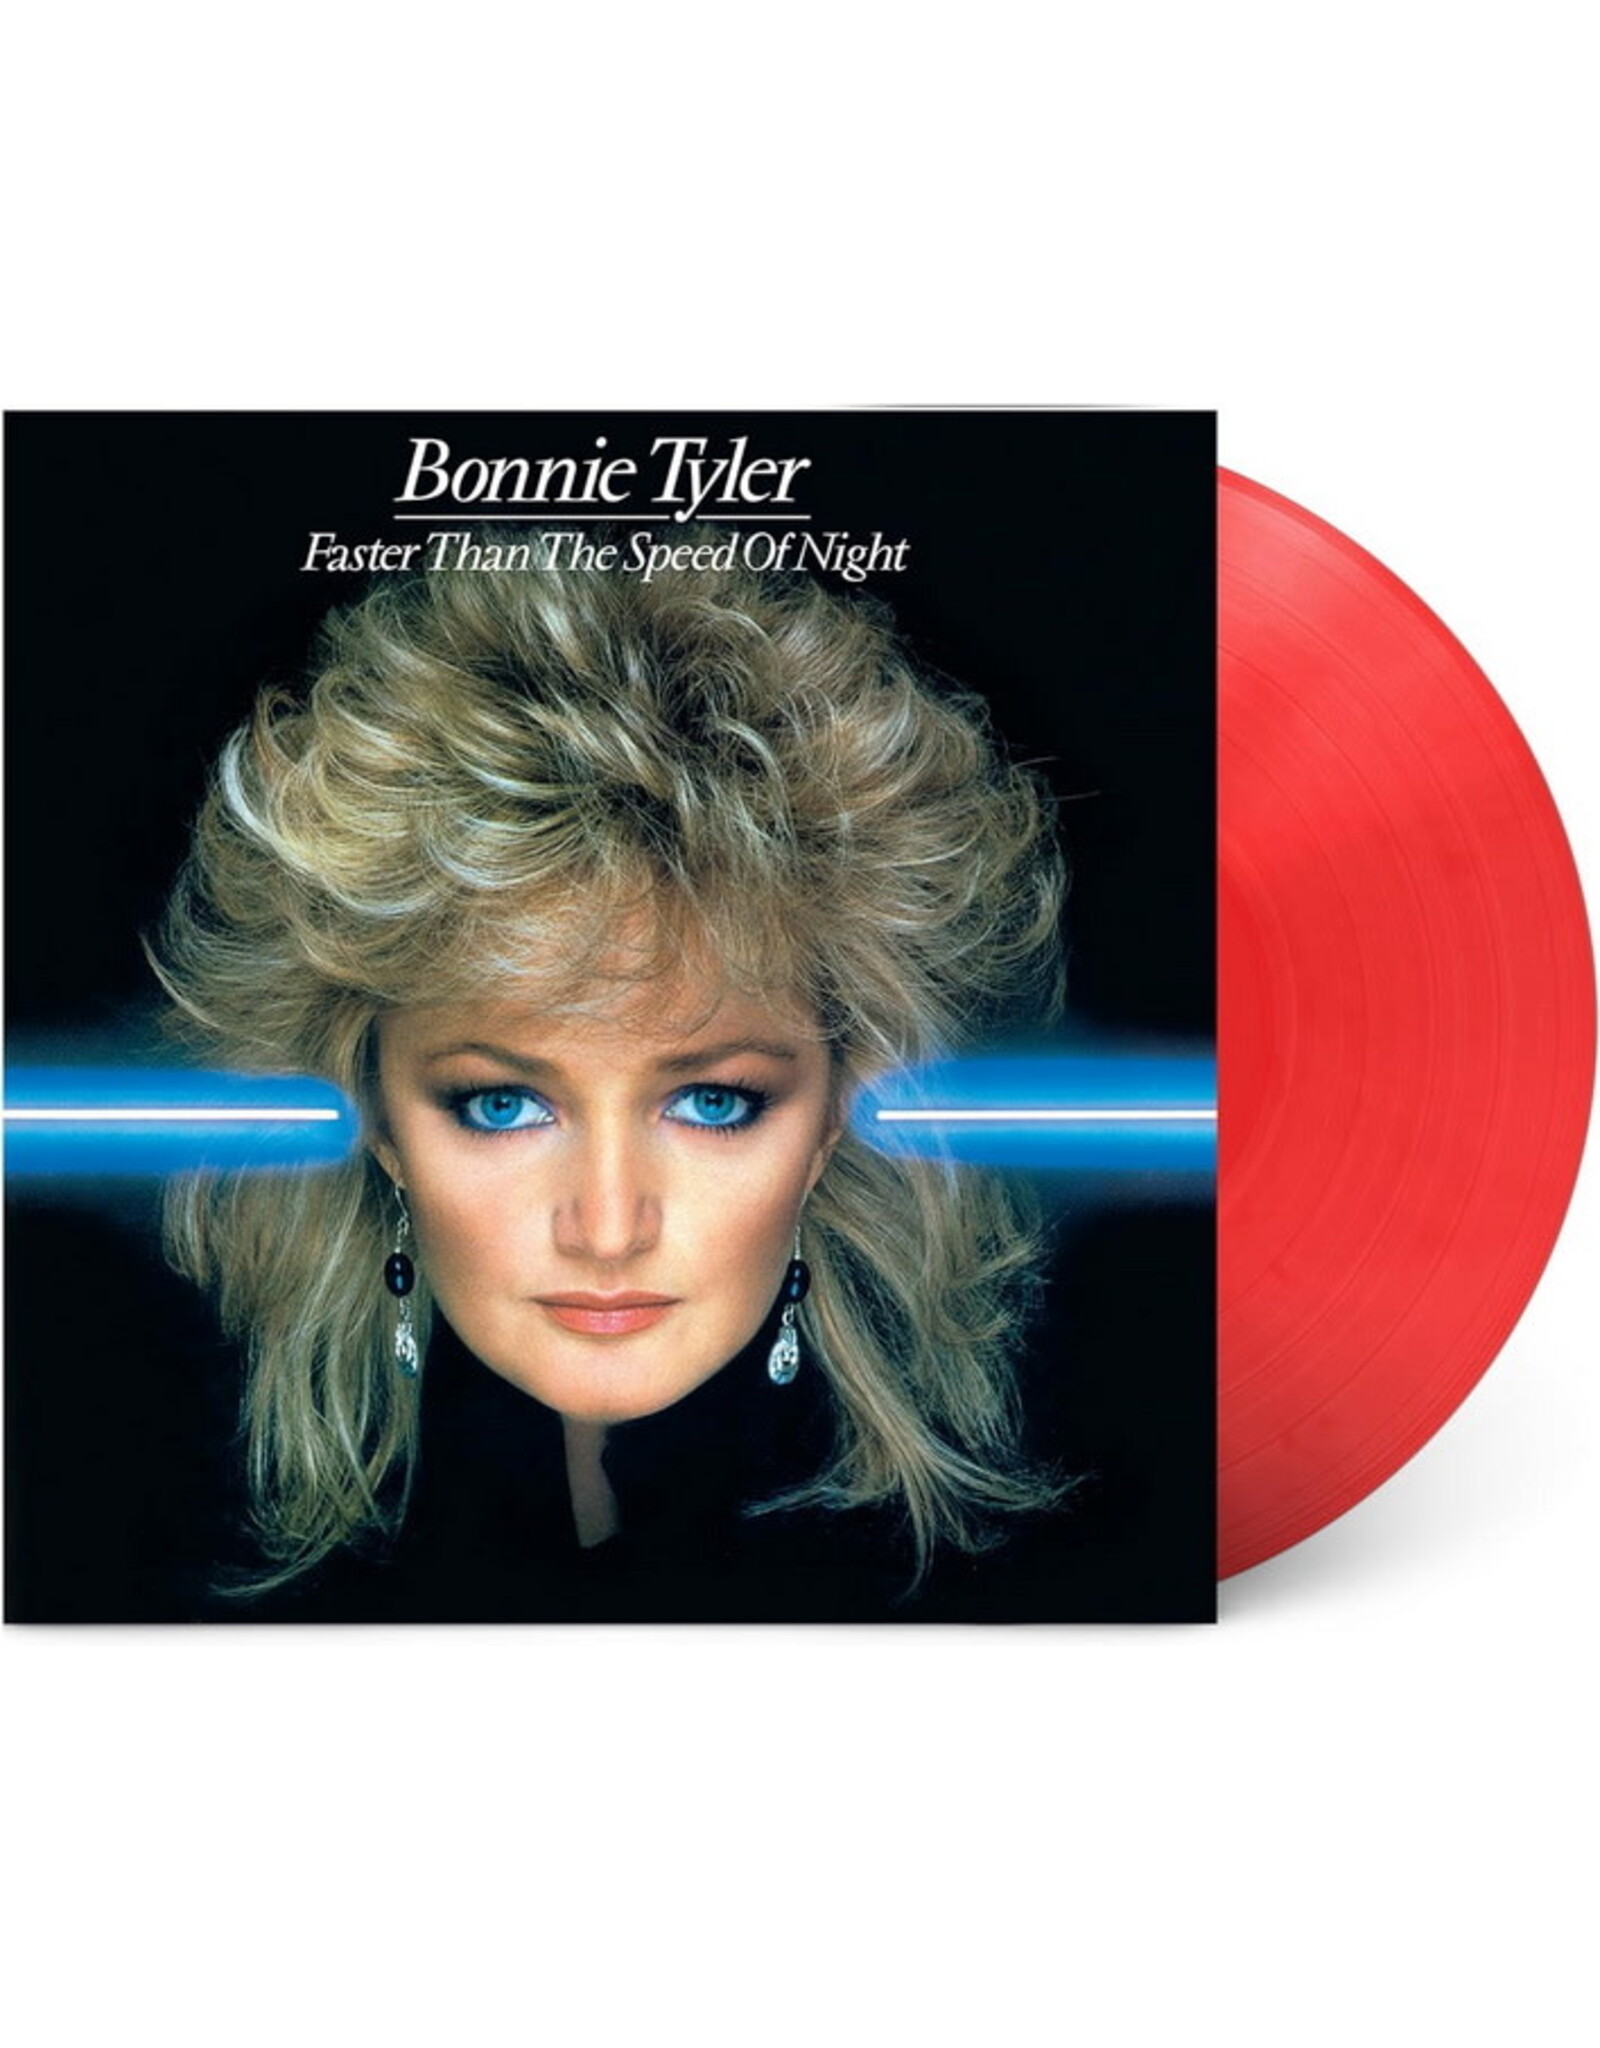 Bonnie Tyler - Faster Than The Speed Of Night (40th Anniversary) [Red Vinyl]